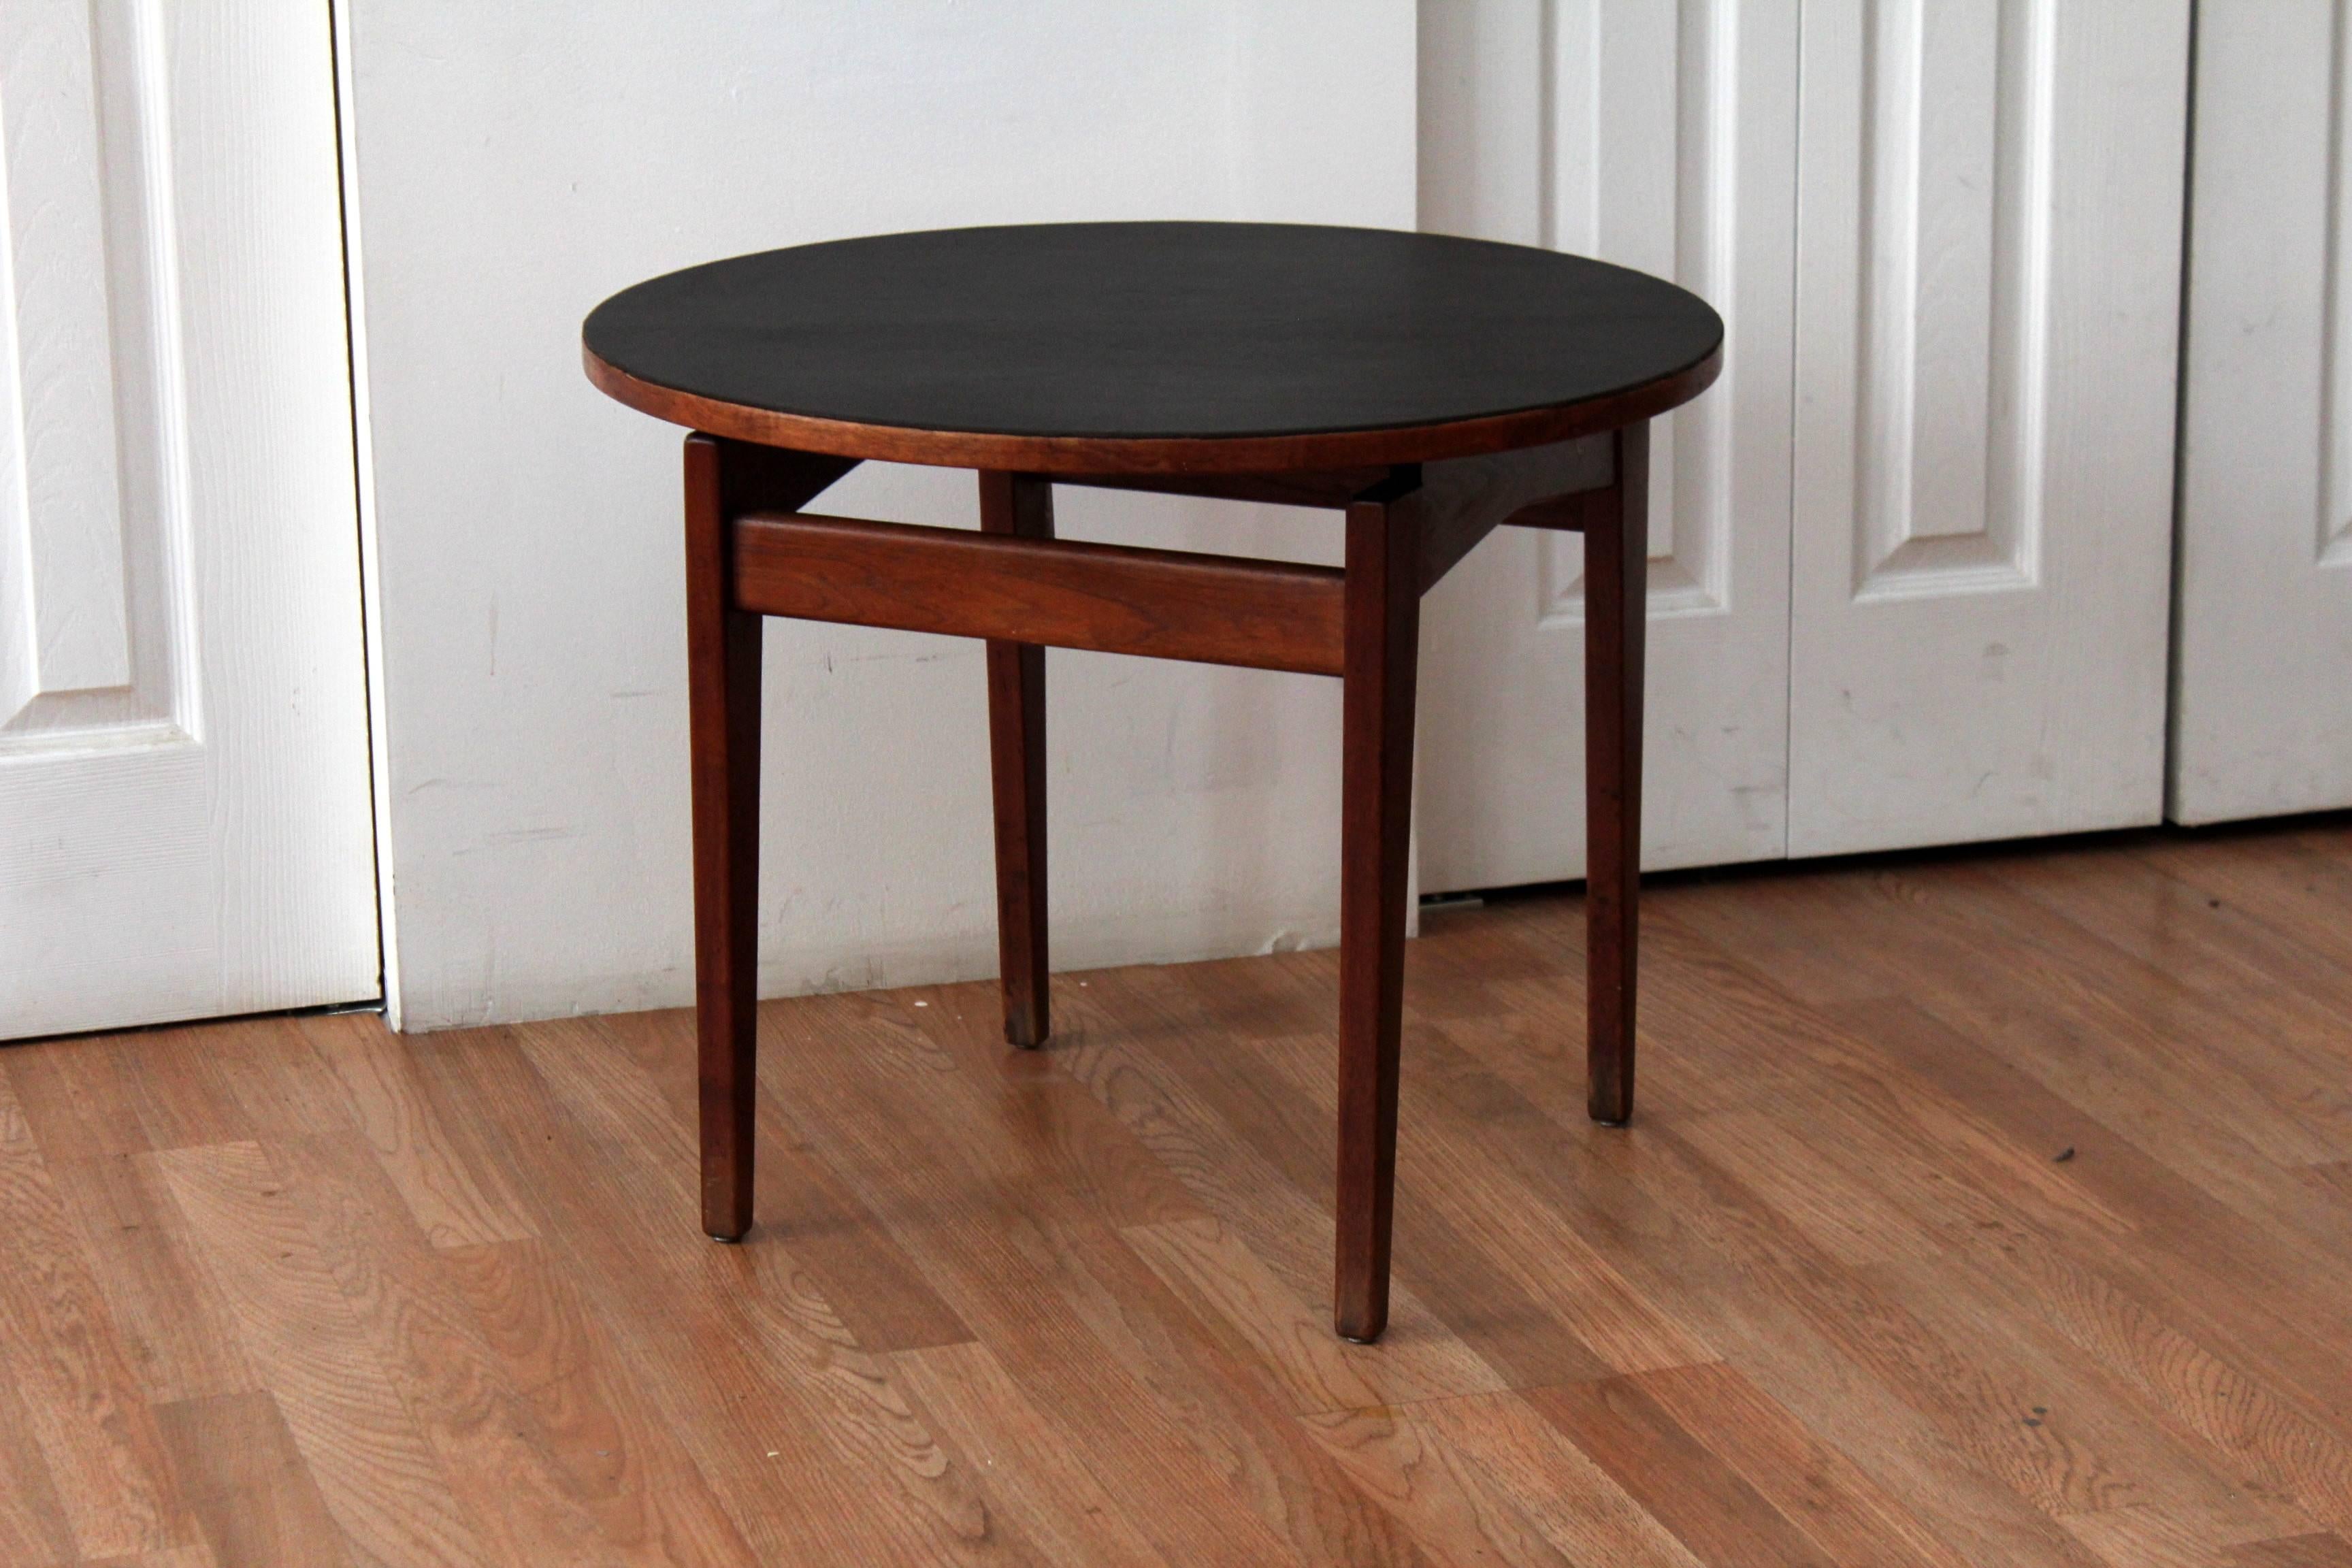 Jens Risom leather and walnut end or side table in solid walnut. The table boasts four tapered legs supporting a floating round walnut and leather covered top. One of the richest, prettiest patinas we've ever seen! Labeled.